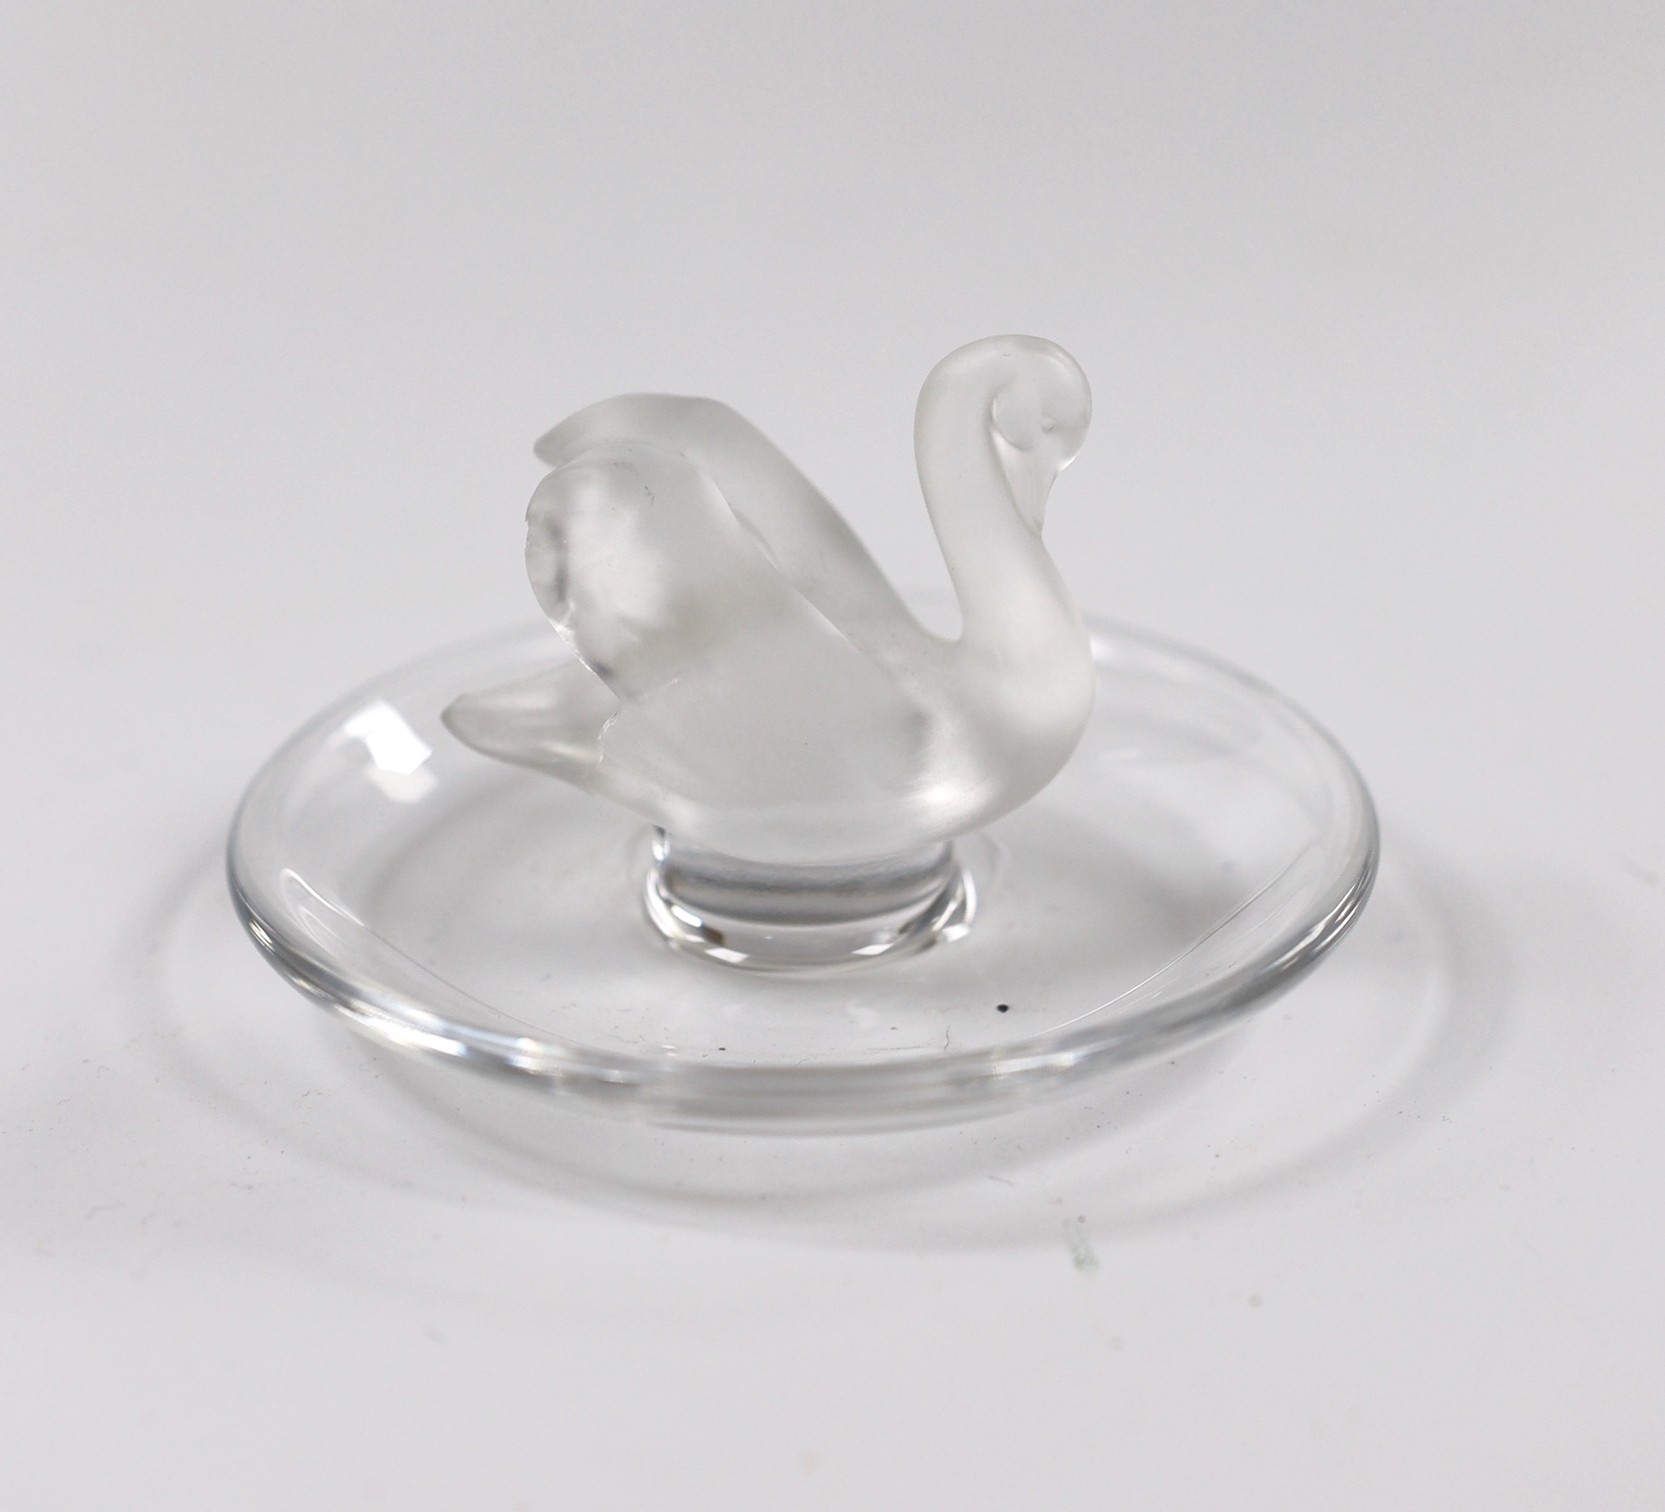 Two Lalique glass paperweights modelled as pecking birds, together with another Lalique swan modelled pin dish